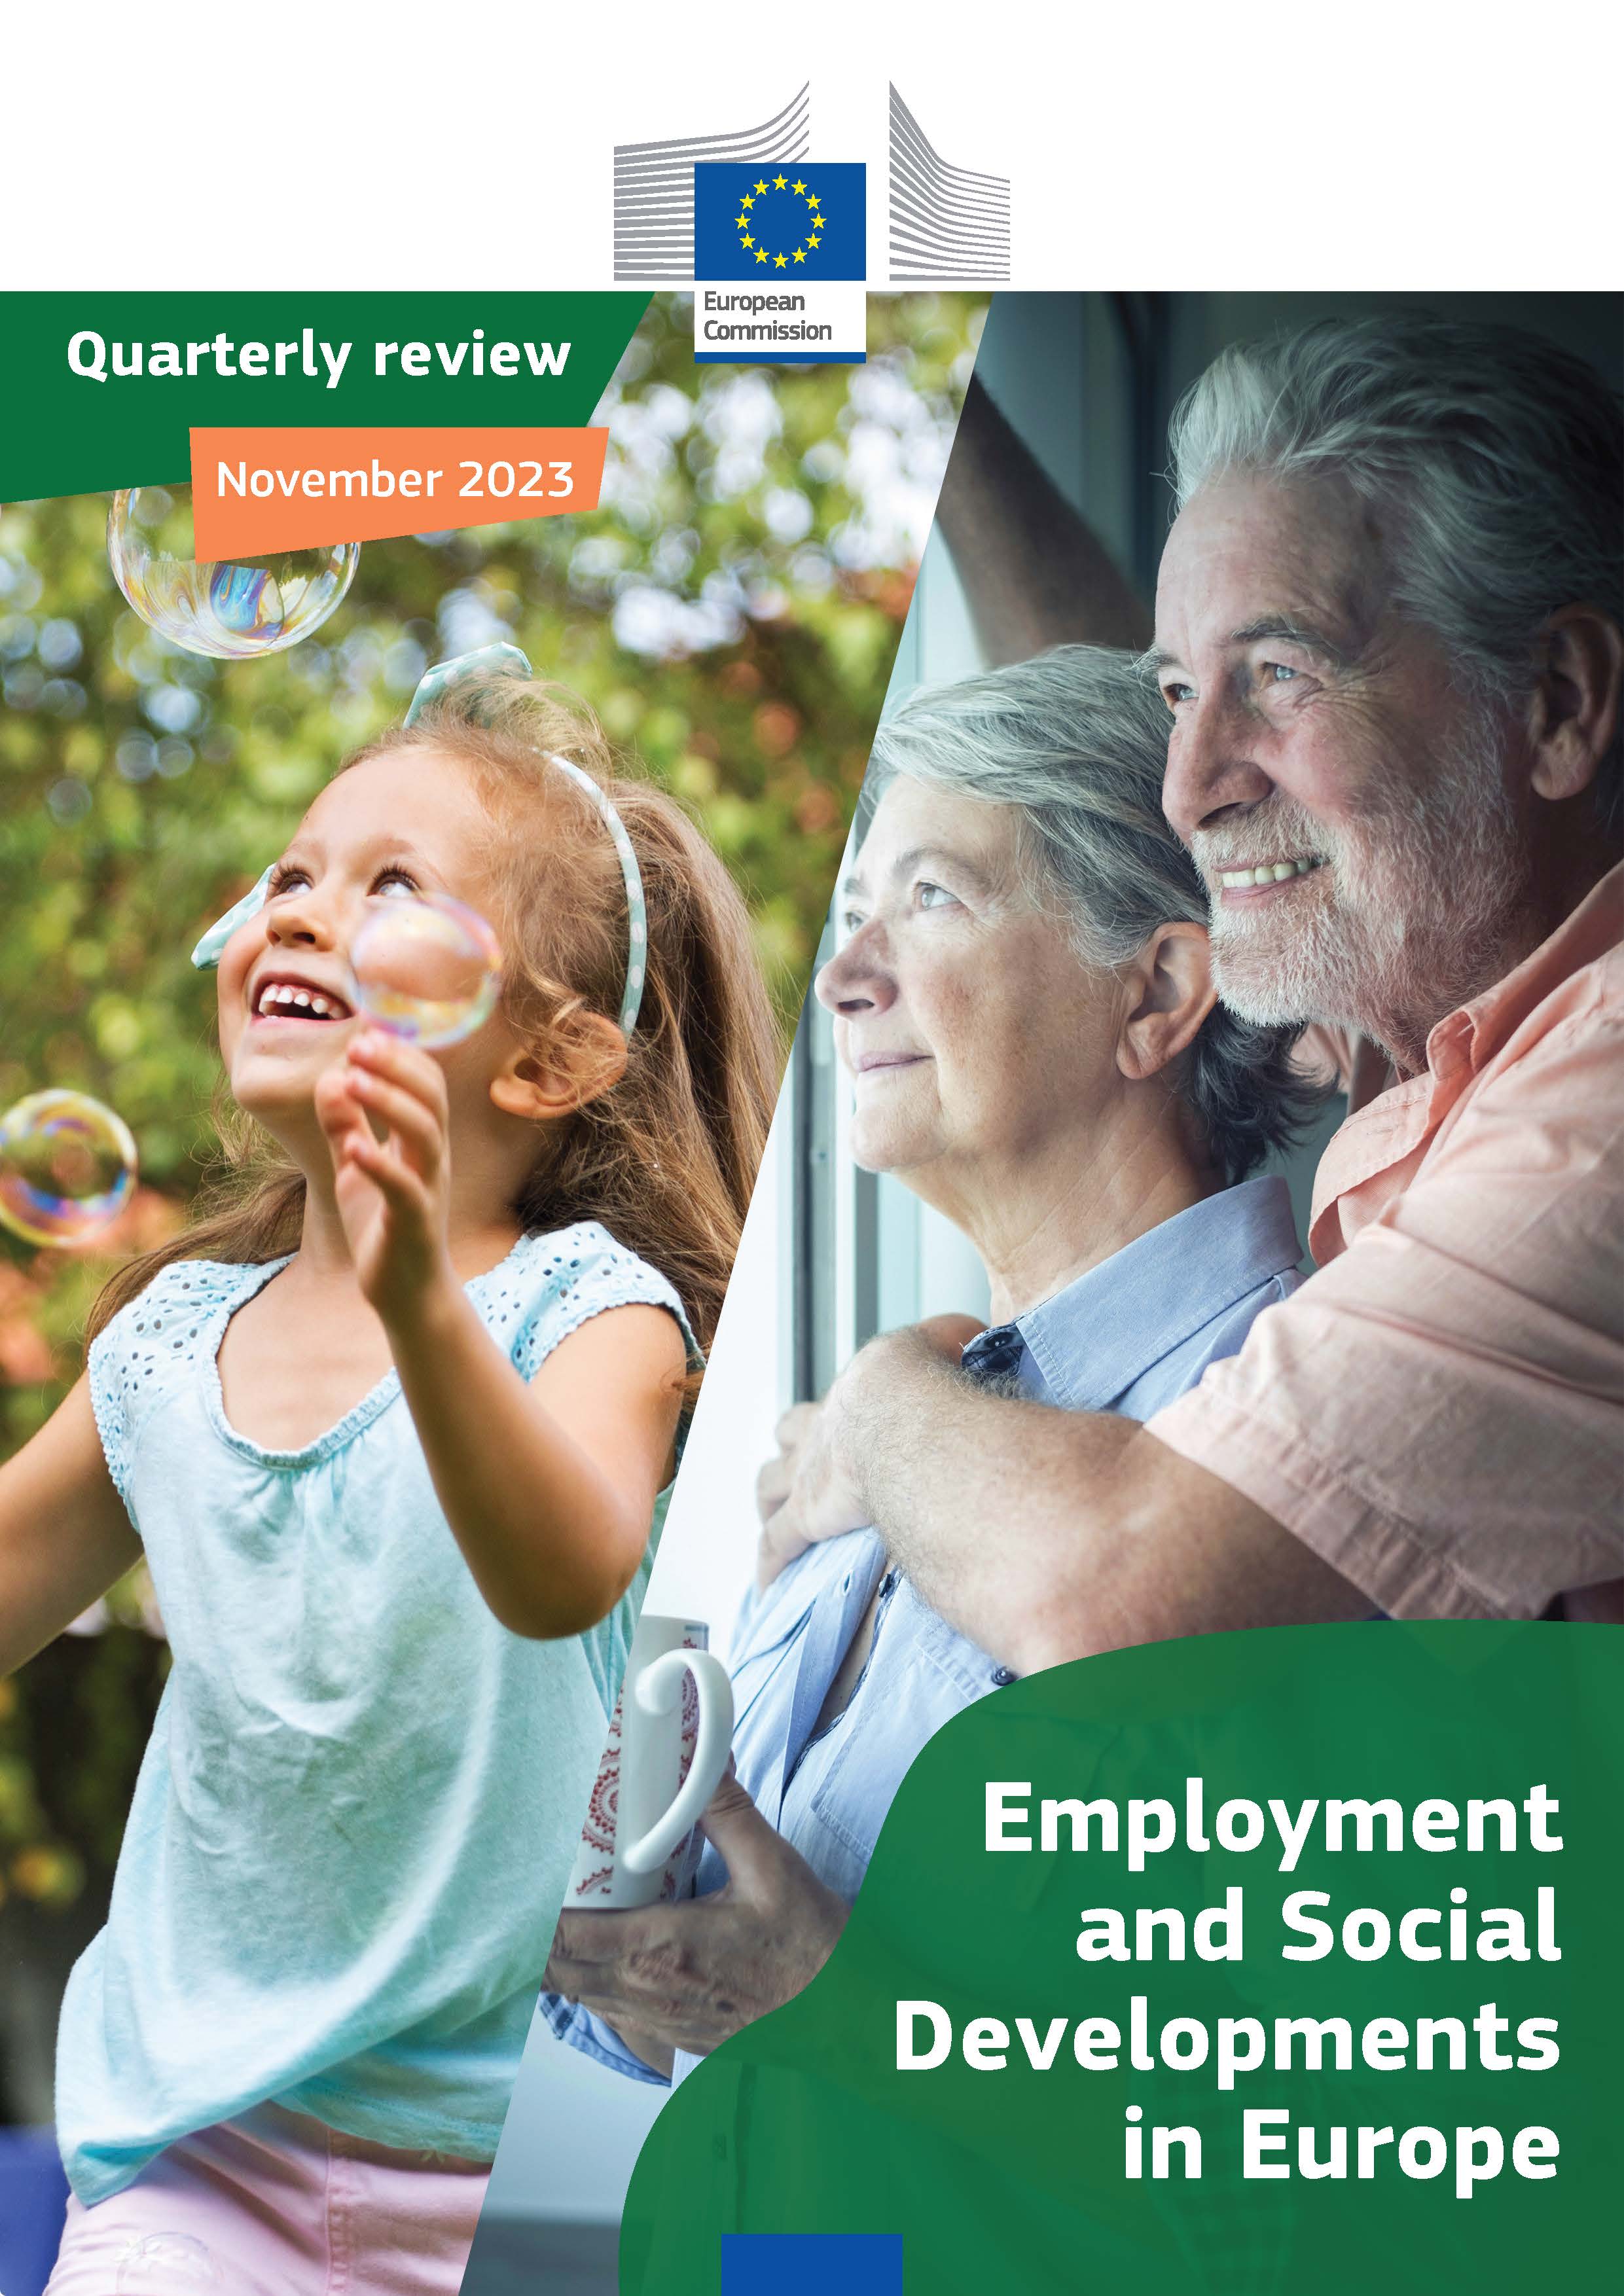 Quarterly Review of Employment and Social Developments in Europe (ESDE) - November 2023